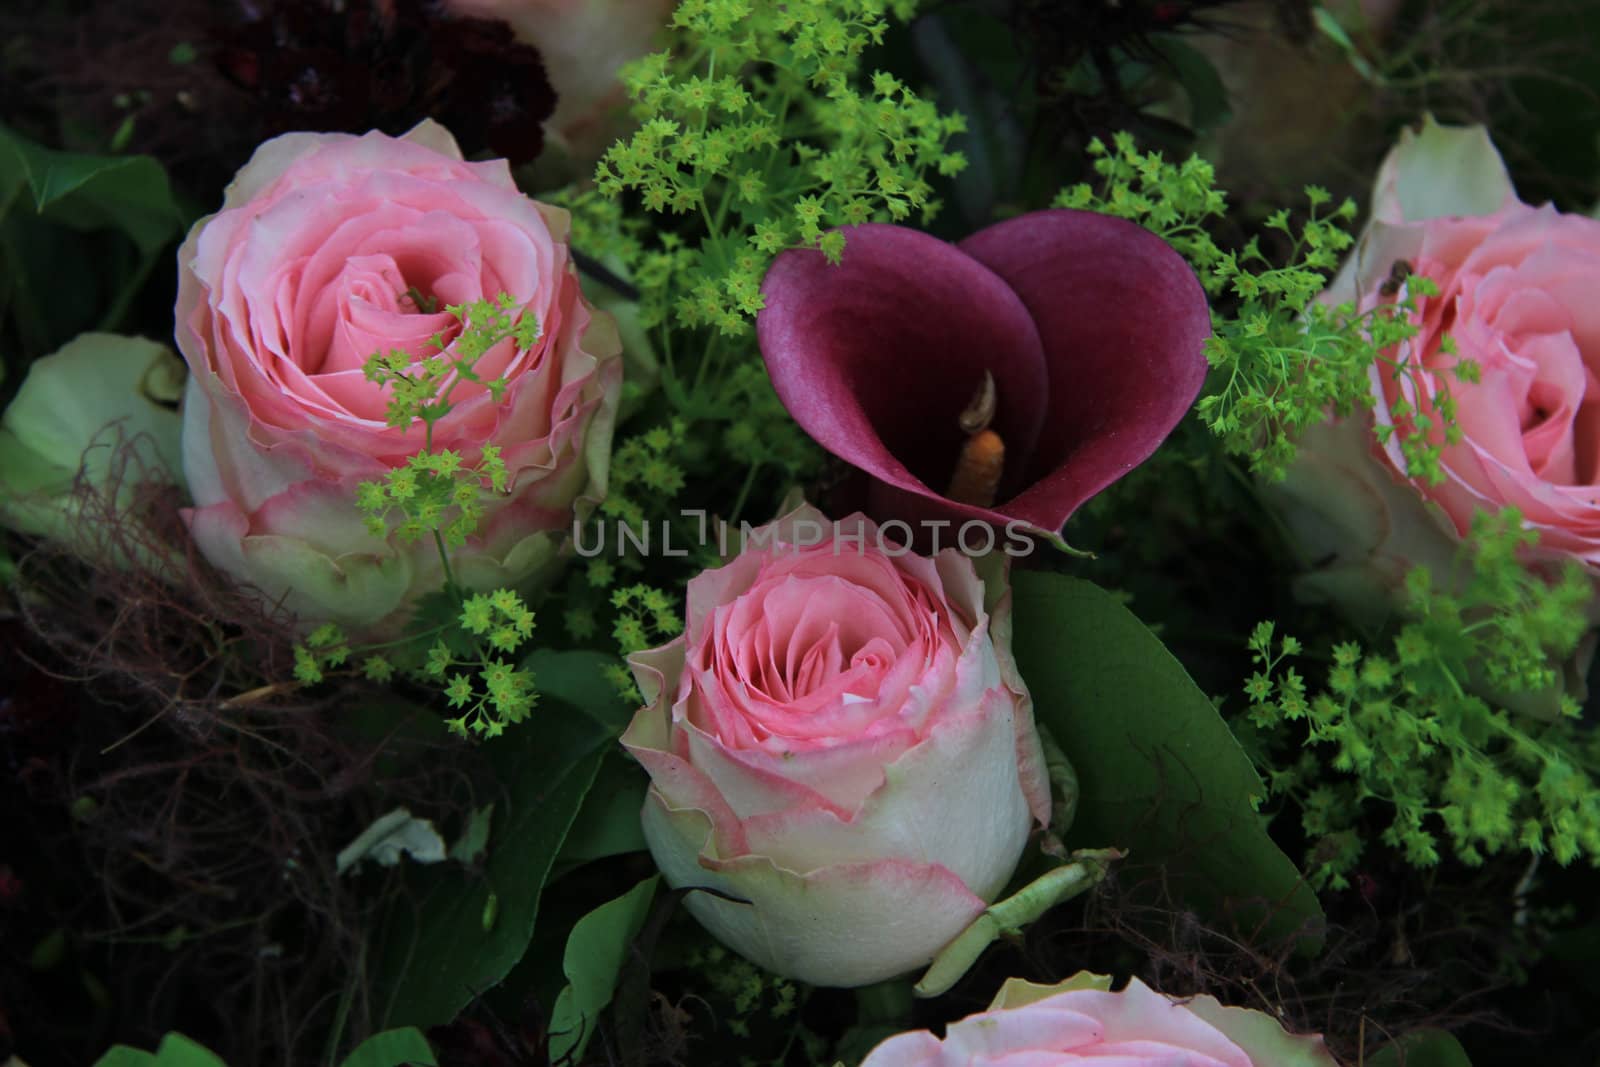 Big pink roses and deep pink purple arum in a floral arrangement